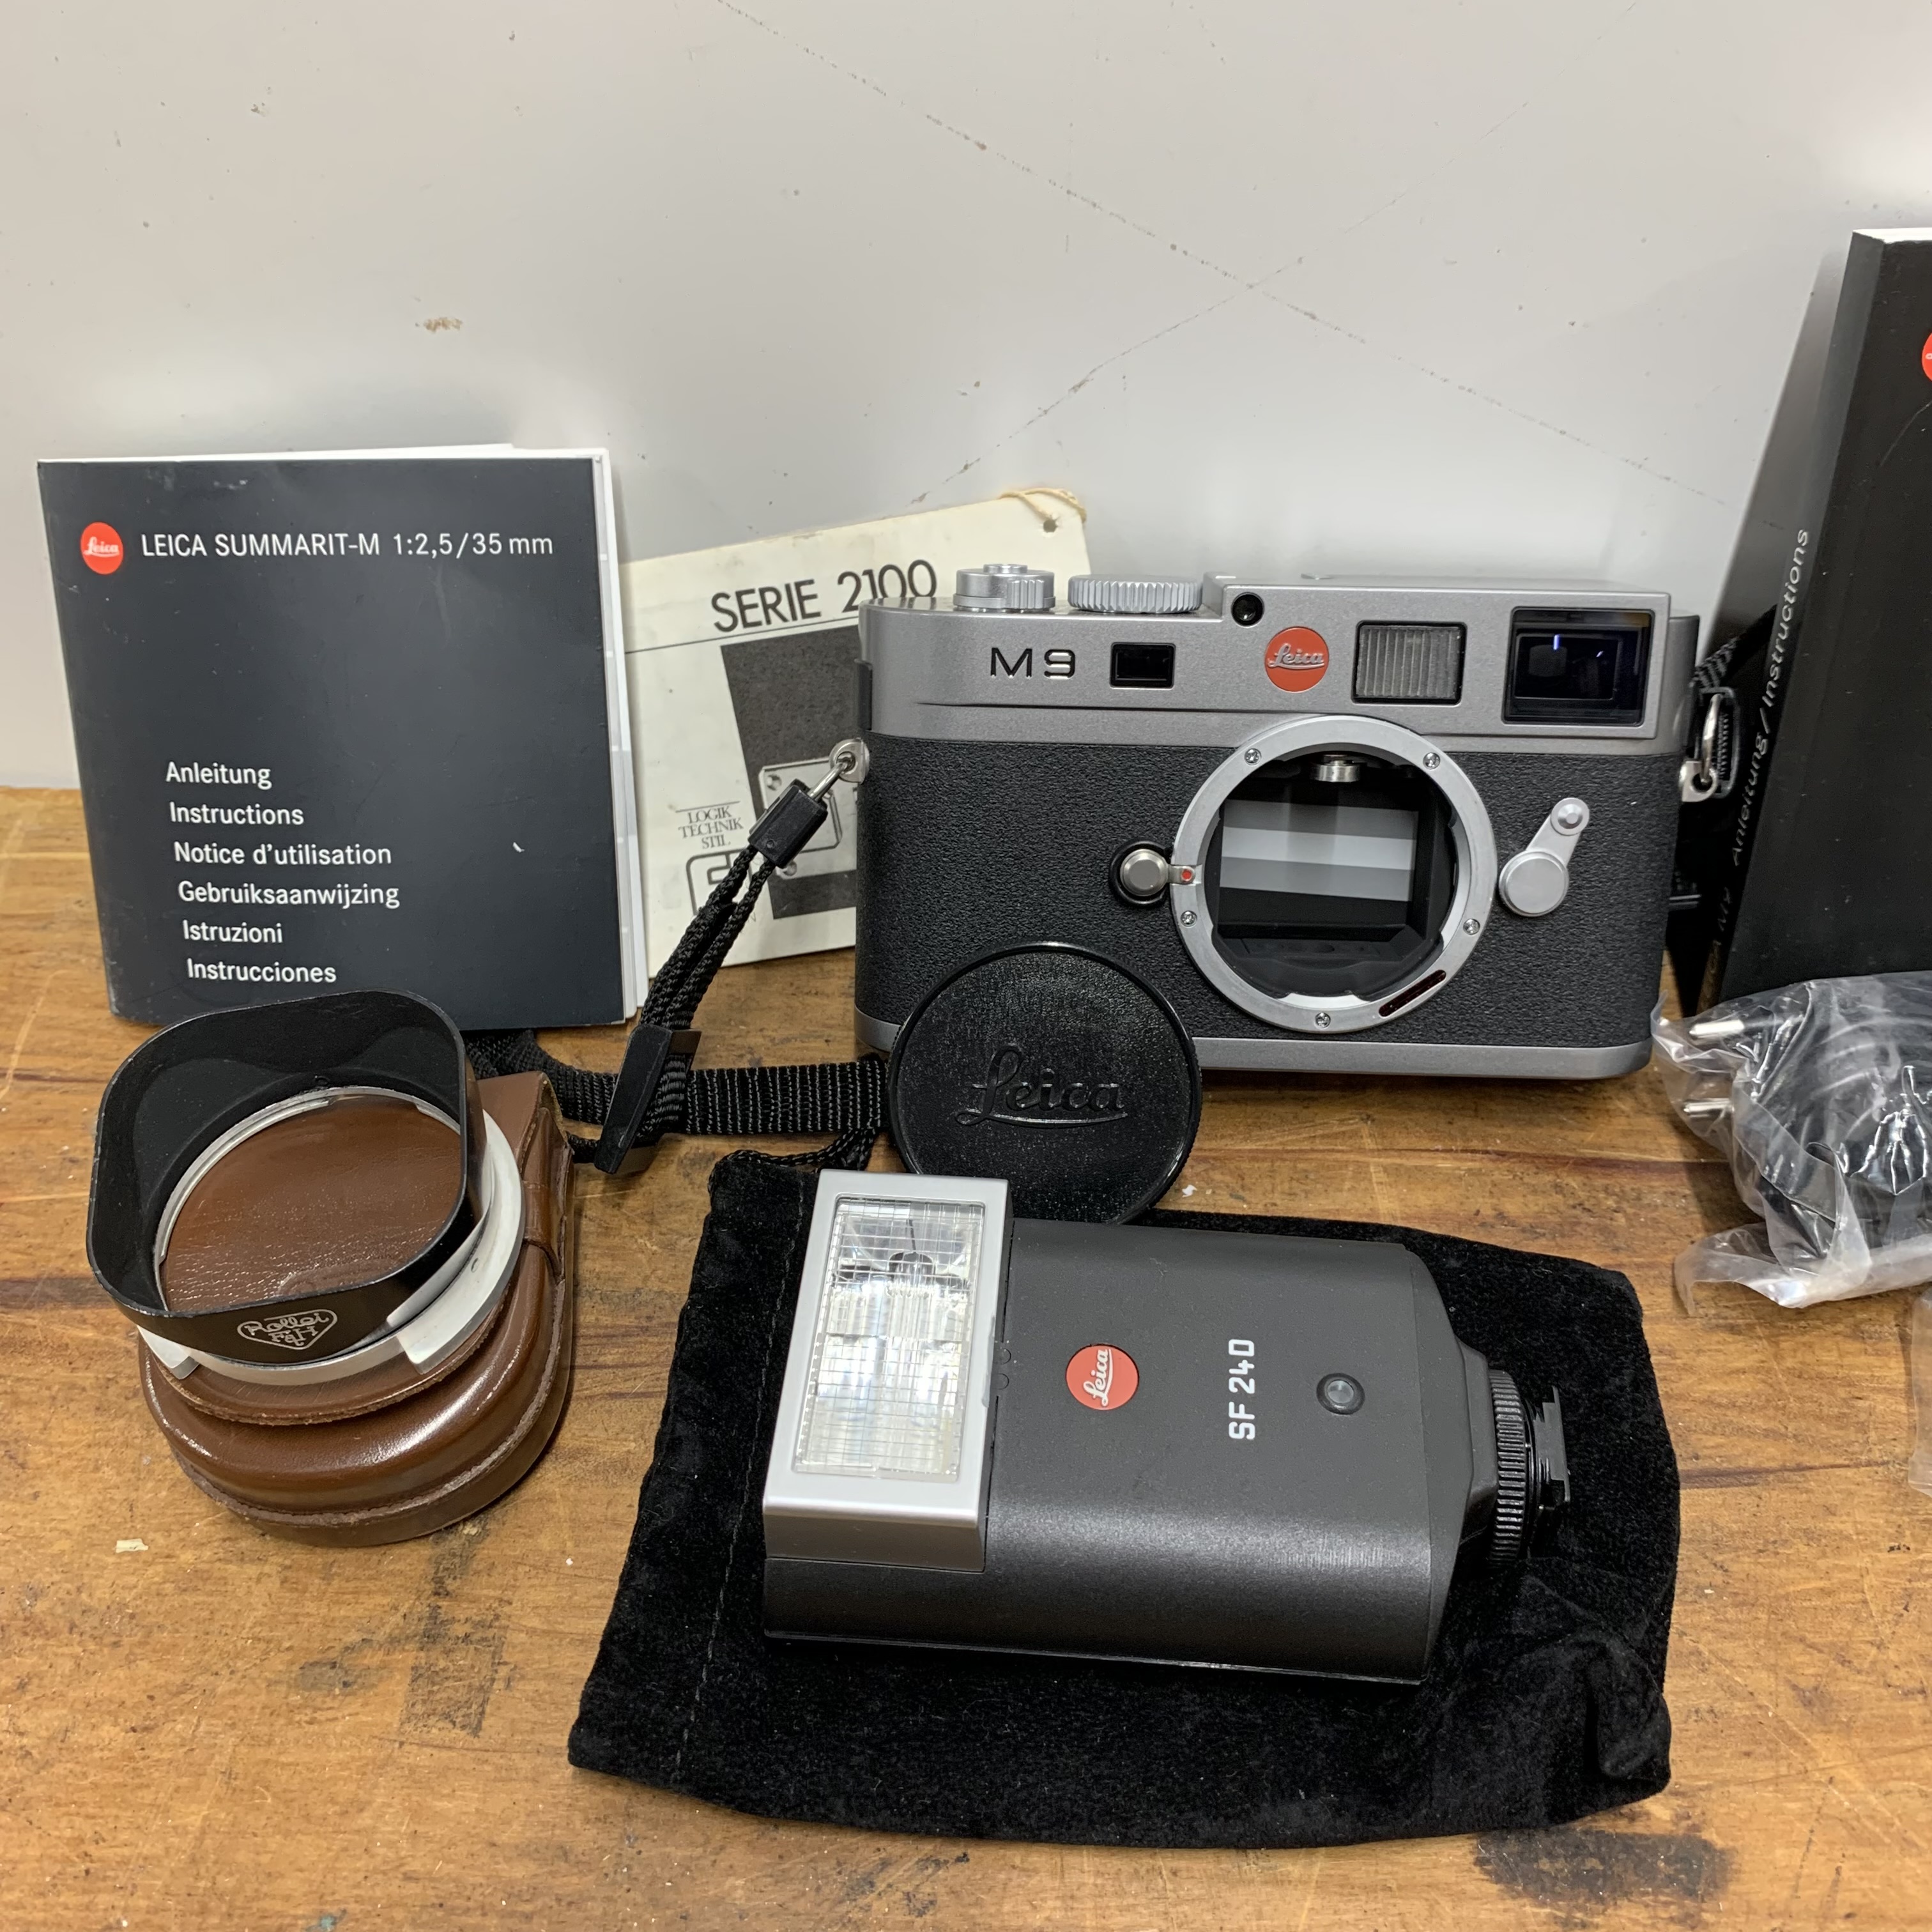 A Leica m9 camera with 3 different lenses and accessories and instruction manual in a high quality - Image 11 of 13